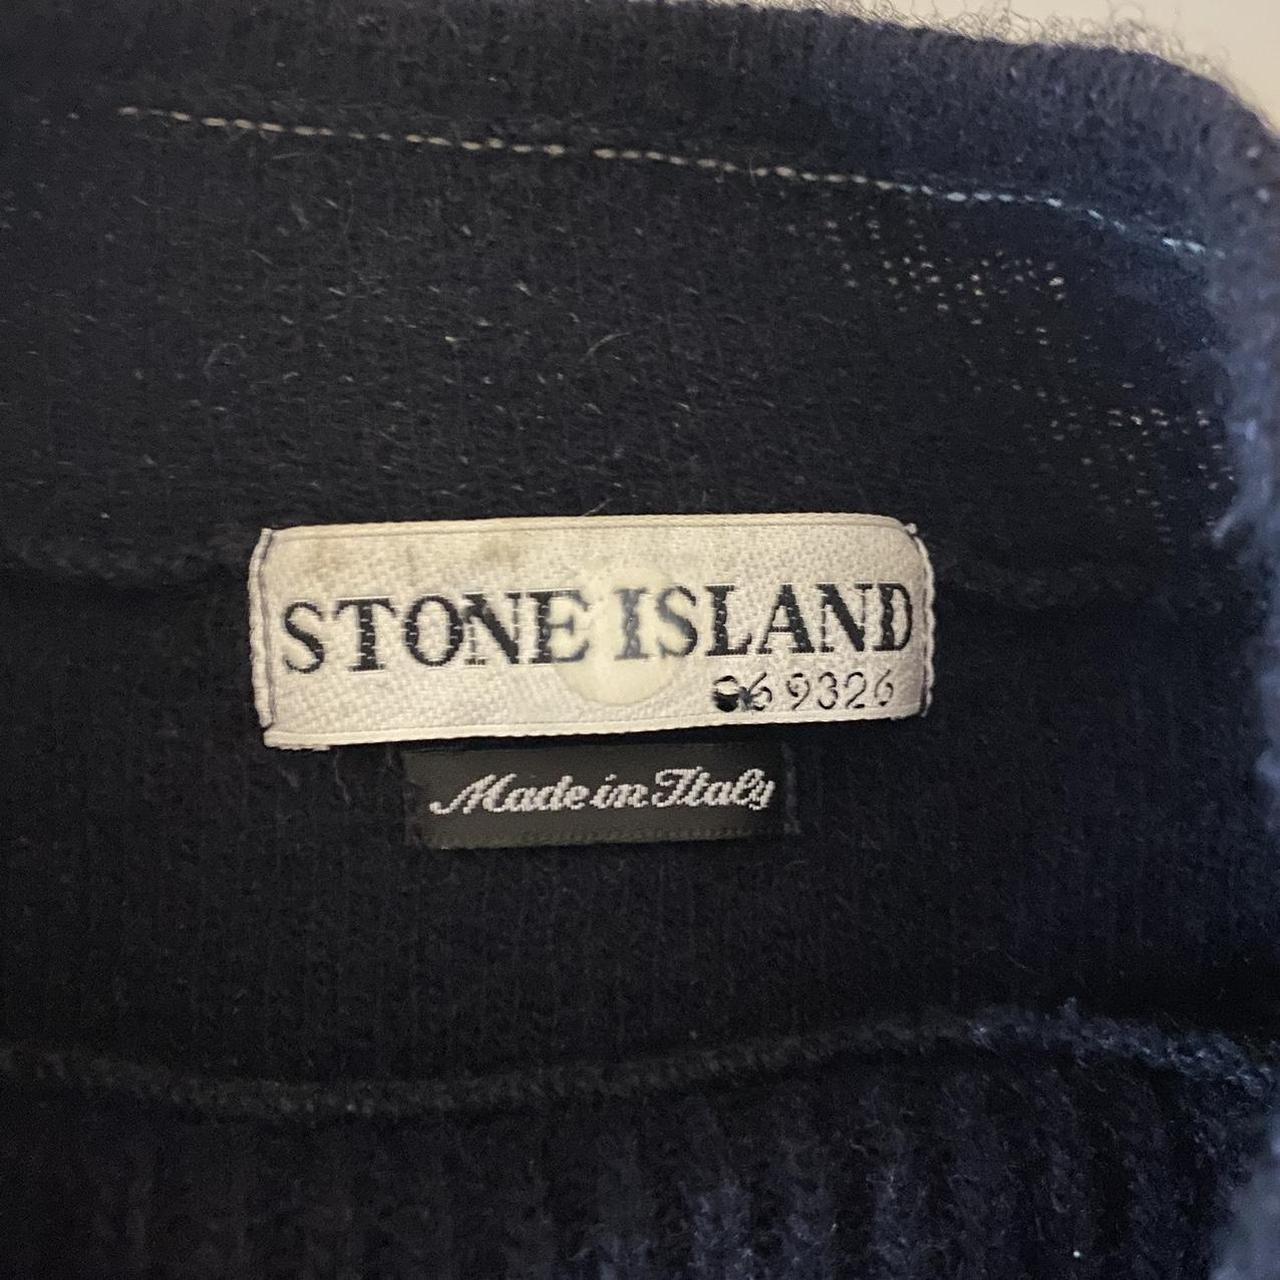 Stone island high neck knit jumper. Soft wool and... - Depop